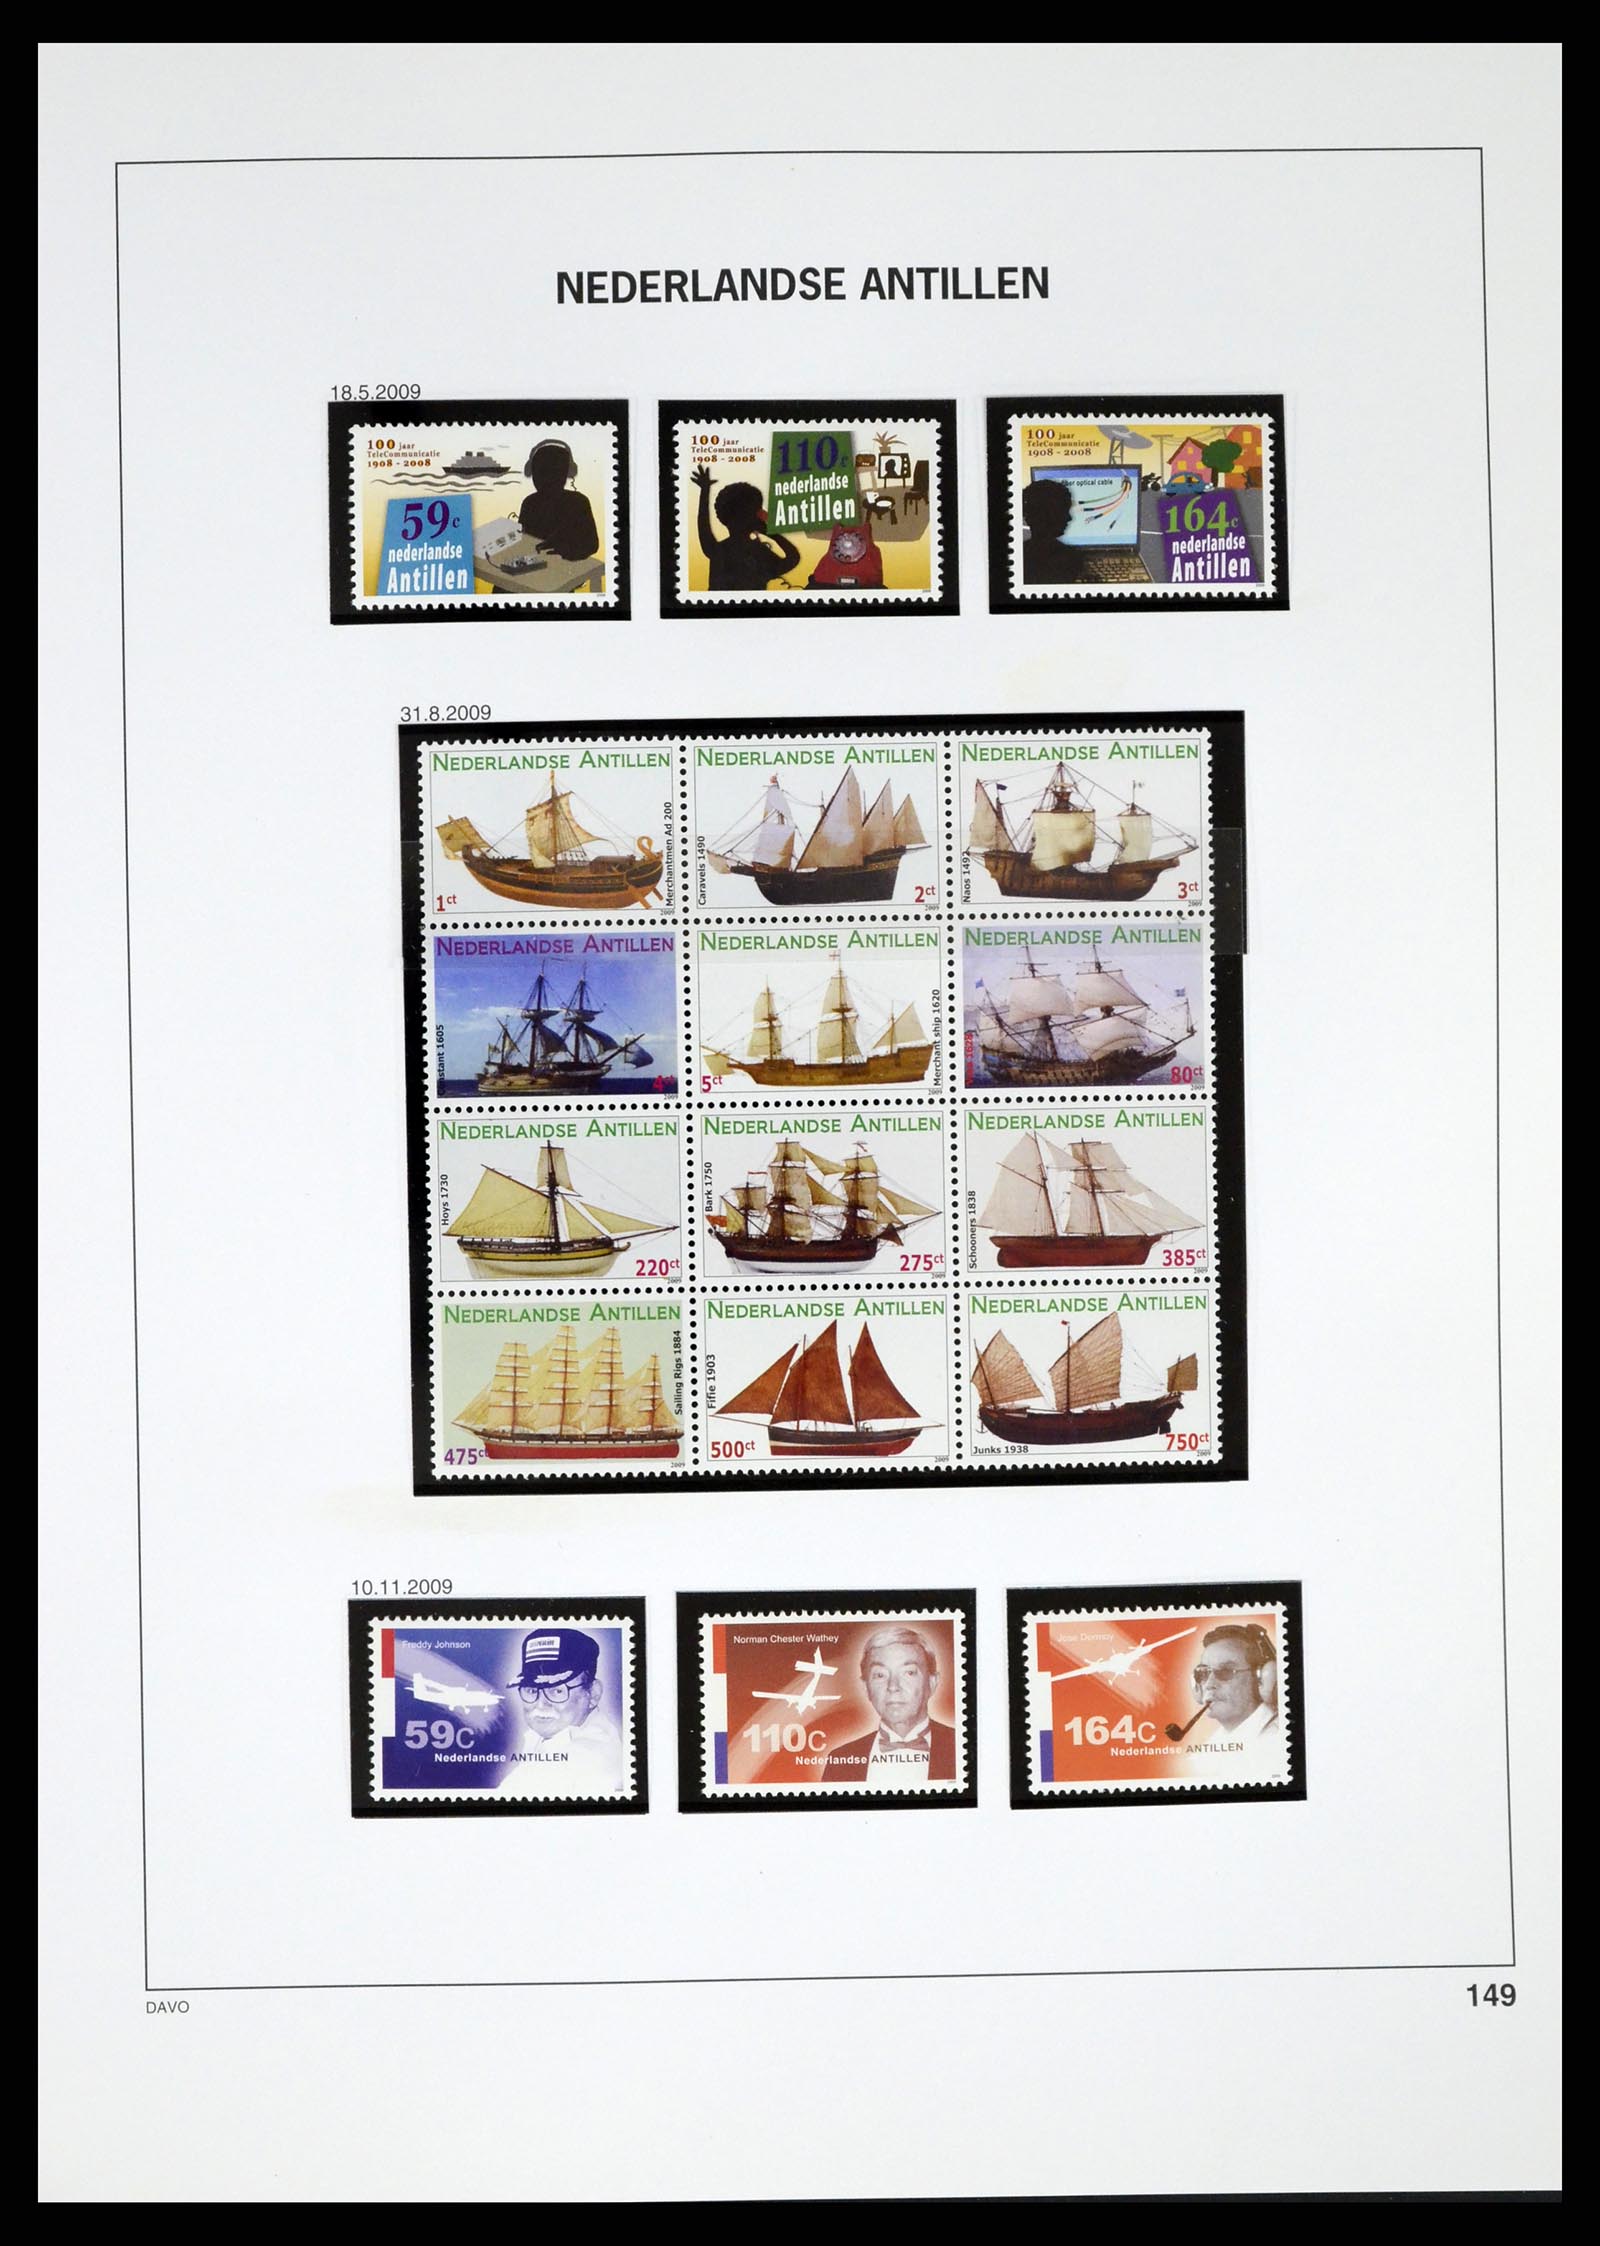 37282 138 - Stamp collection 37282 Dutch territories till 2009.